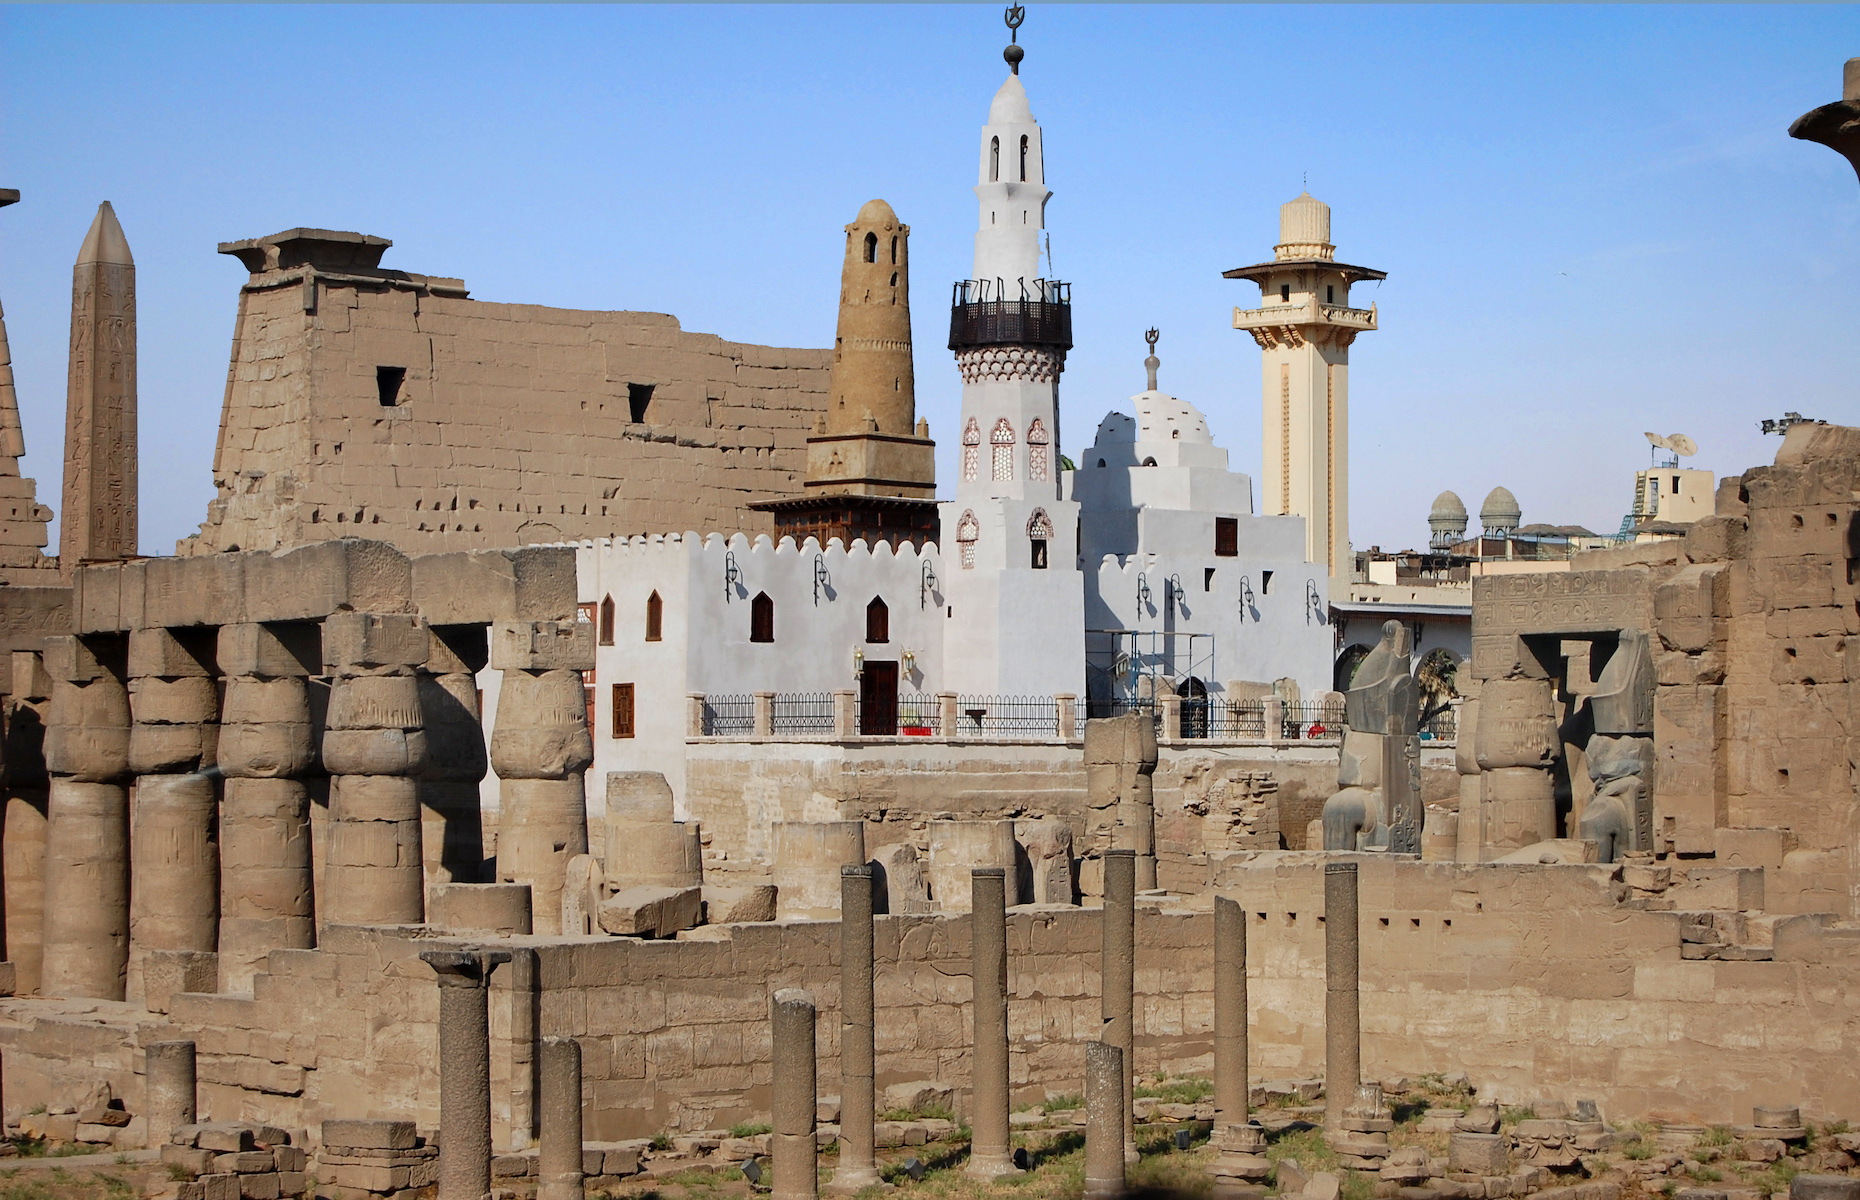 <p>The Egyptian city of <a href="https://www.britannica.com/place/Luxor">Luxor</a> occupies a section of the ancient city of Thebes, or Waset, today a <a href="https://whc.unesco.org/en/list/87/">World Heritage Site</a>. Thebes was founded around 2100 BCE, although there is evidence of continuous inhabitation on the site going back a dizzying 250,000 years. In its heyday, the city was described as <a href="https://web.archive.org/web/20180613201341/http:/www.thebanmappingproject.com/about/KVMasterplan/KVM_CH1.pdf">one of the most spectacular in Egypt</a> and contained two of the largest religious structures ever built, one of which—the <a href="https://www.historymuseum.ca/cmc/exhibitions/civil/egypt/egca09e.html">Luxor Temple</a>—is still partially standing.</p>